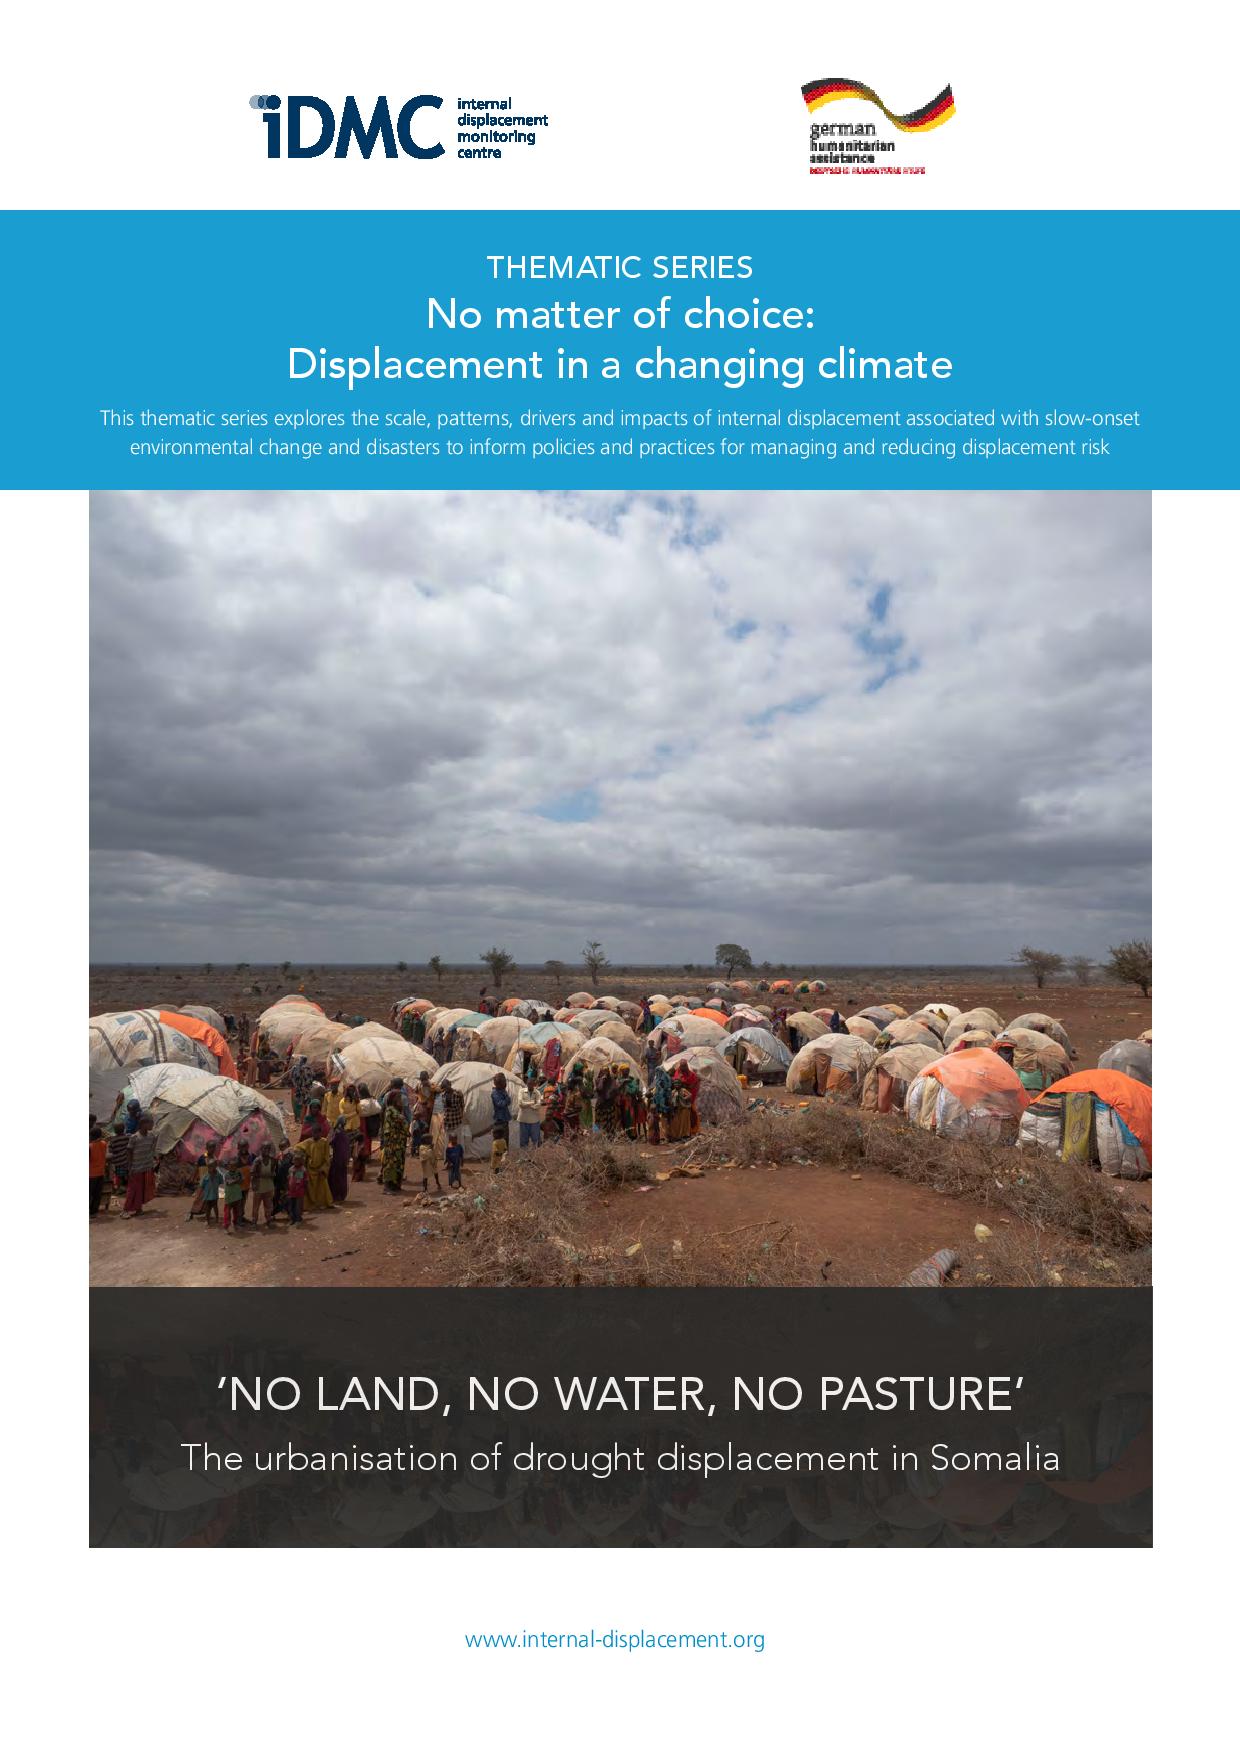 No land, no water, no pasture: the urbanisation of drought displacement in Somalia